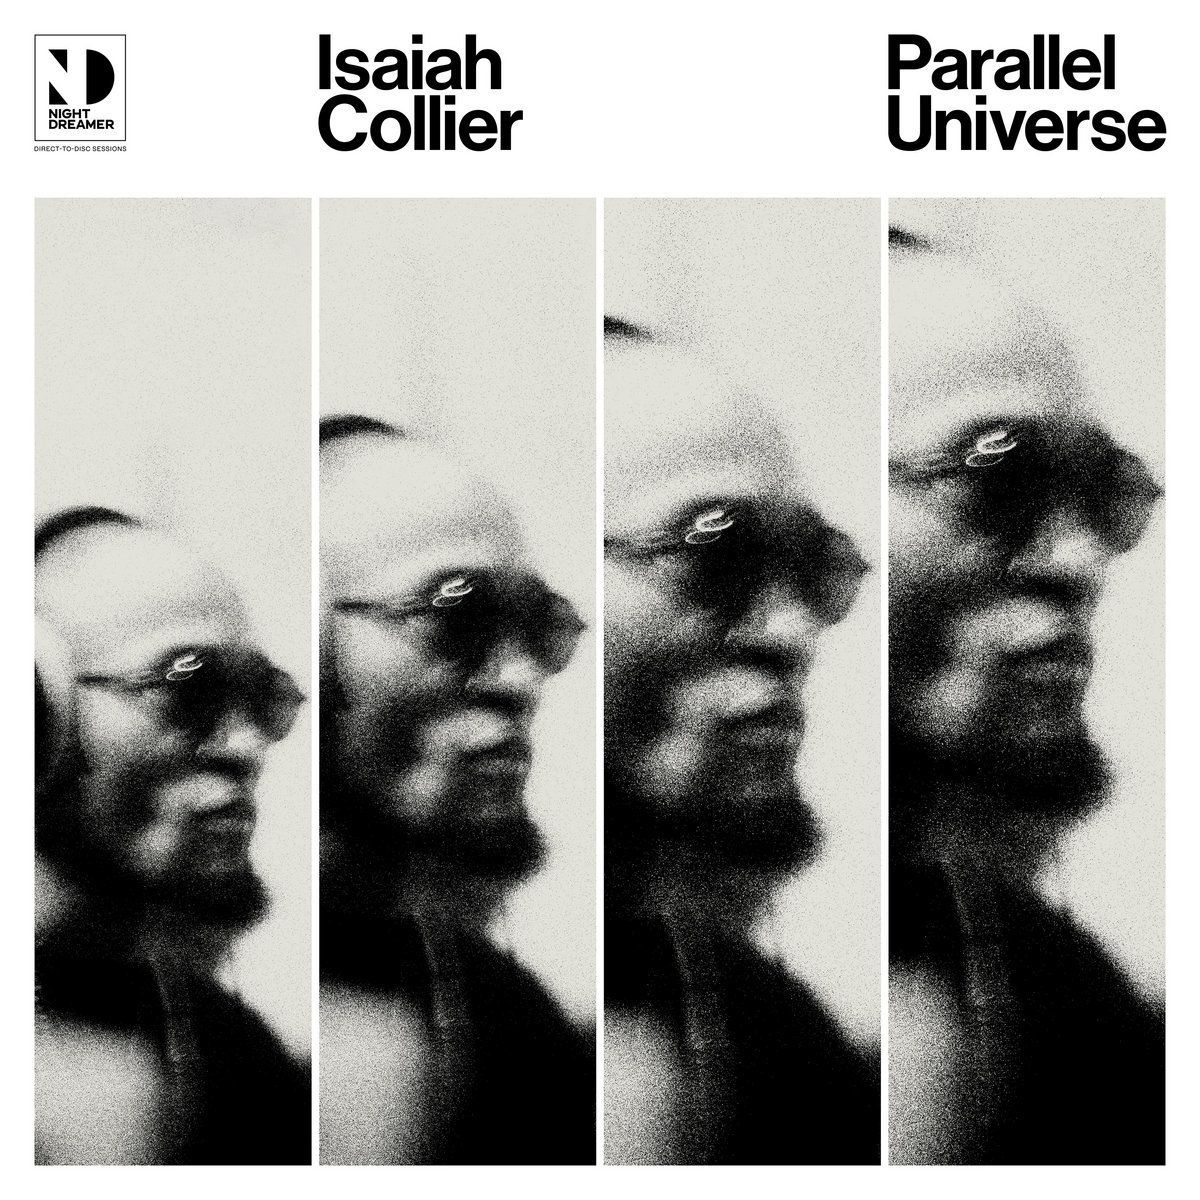 #IsaiahCollier’s ‘Parallel Universe’ is featured in our list of the 50 BEST ALBUMS OF 2023 | Explore the complete list here: album.ink/BestAlbums23